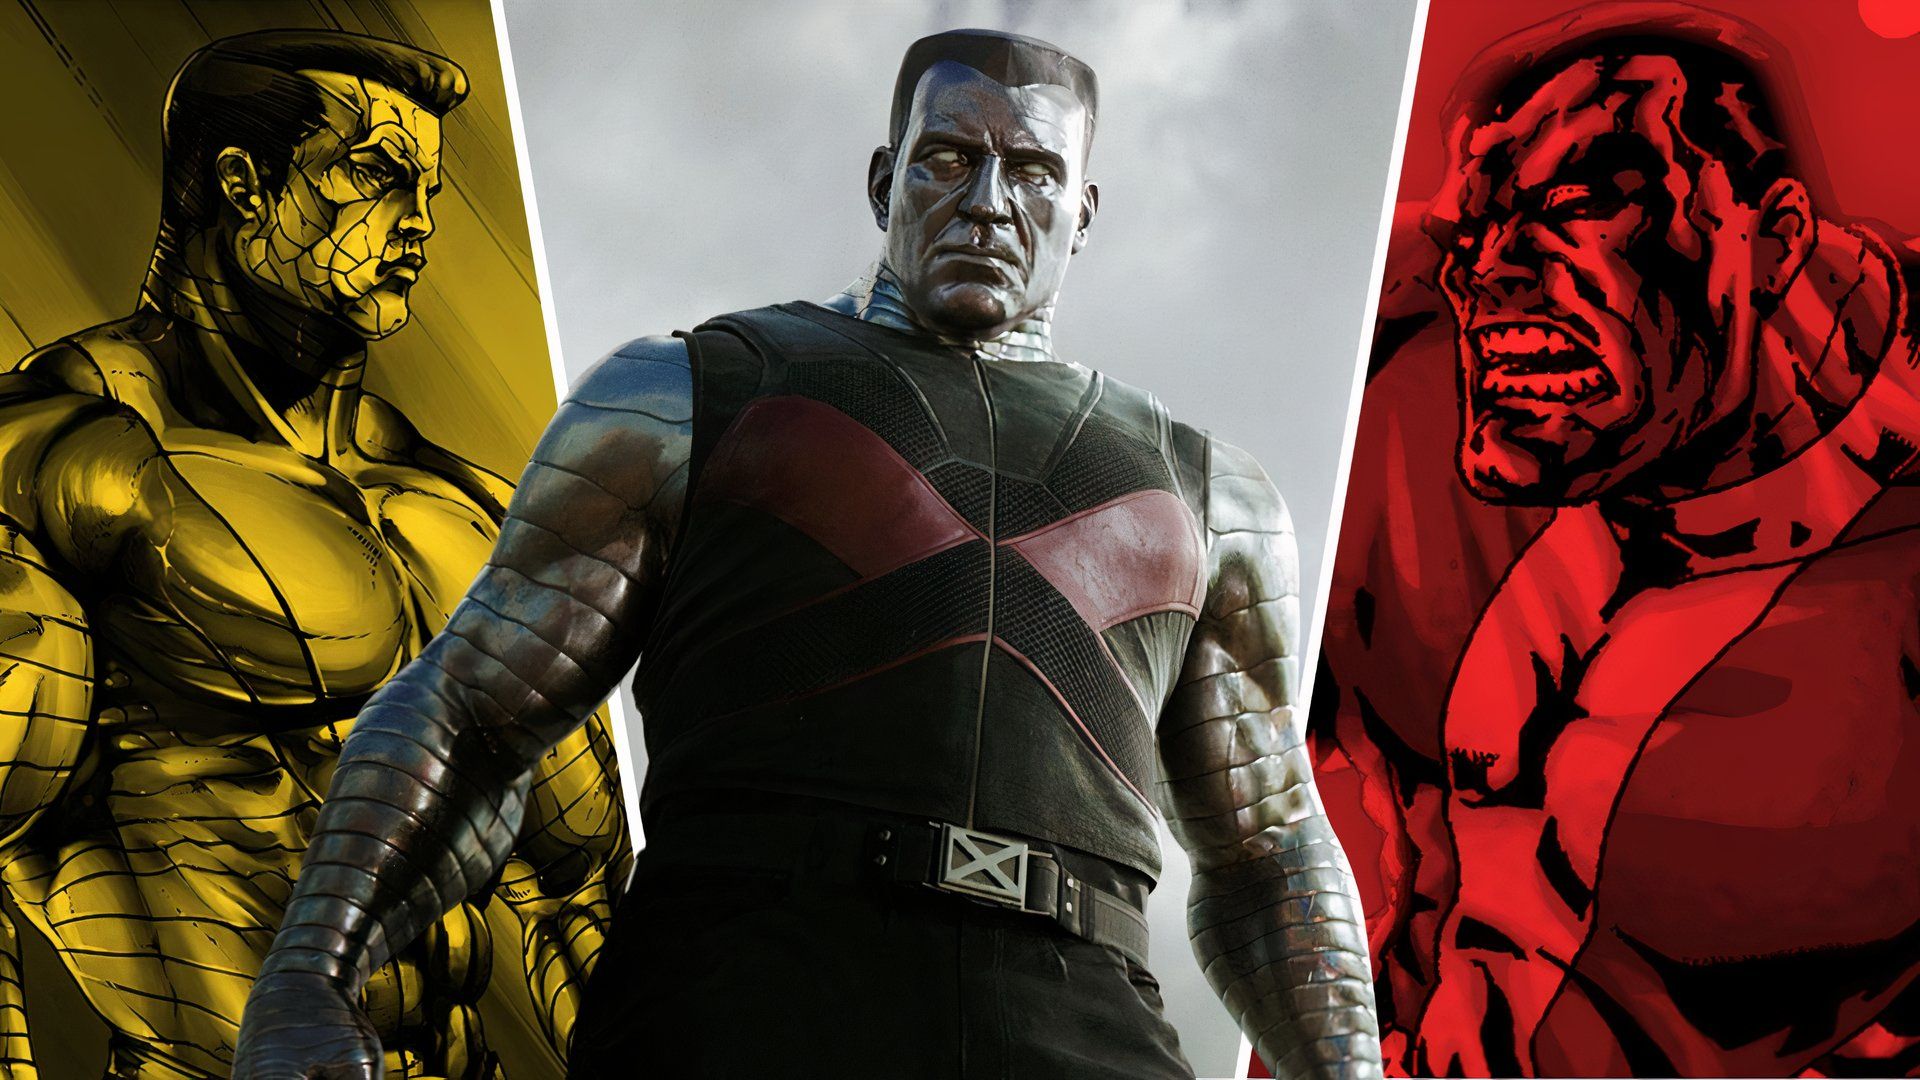 An edited image of the Colossus character in Deadpool in both the movie and comics